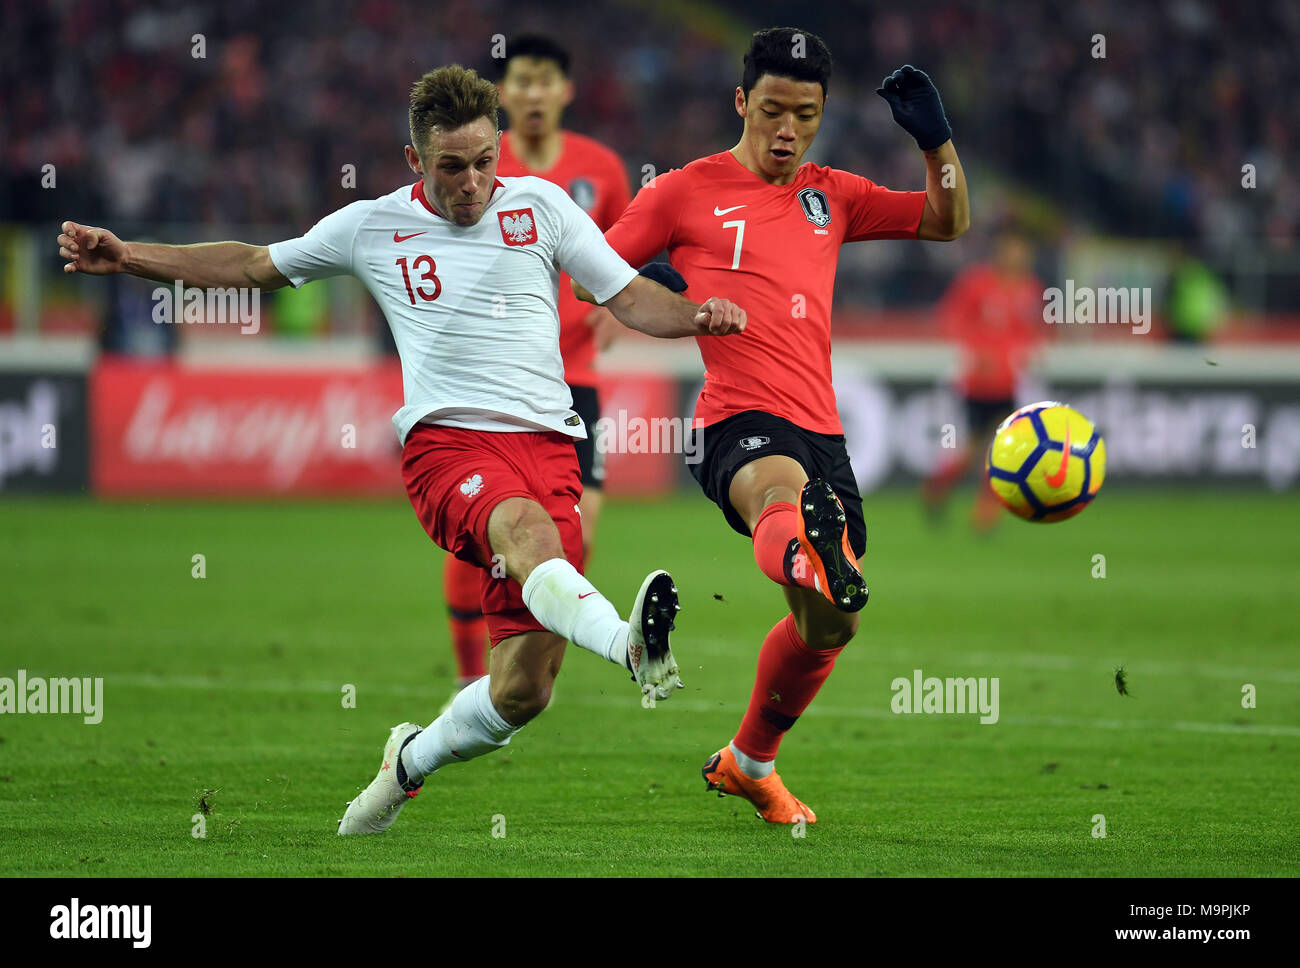 Chorzow, Poland. 27th Mar, 2018. Kwang Hee-chan (R) of South Korea vies with Maciej Rybus (L) of Poland during a friendly match between Poland and South Korea in Chorzow, Poland, on March 27, 2018. Poland won 3-2. Credit: Maciej Gillert/Xinhua/Alamy Live News Stock Photo